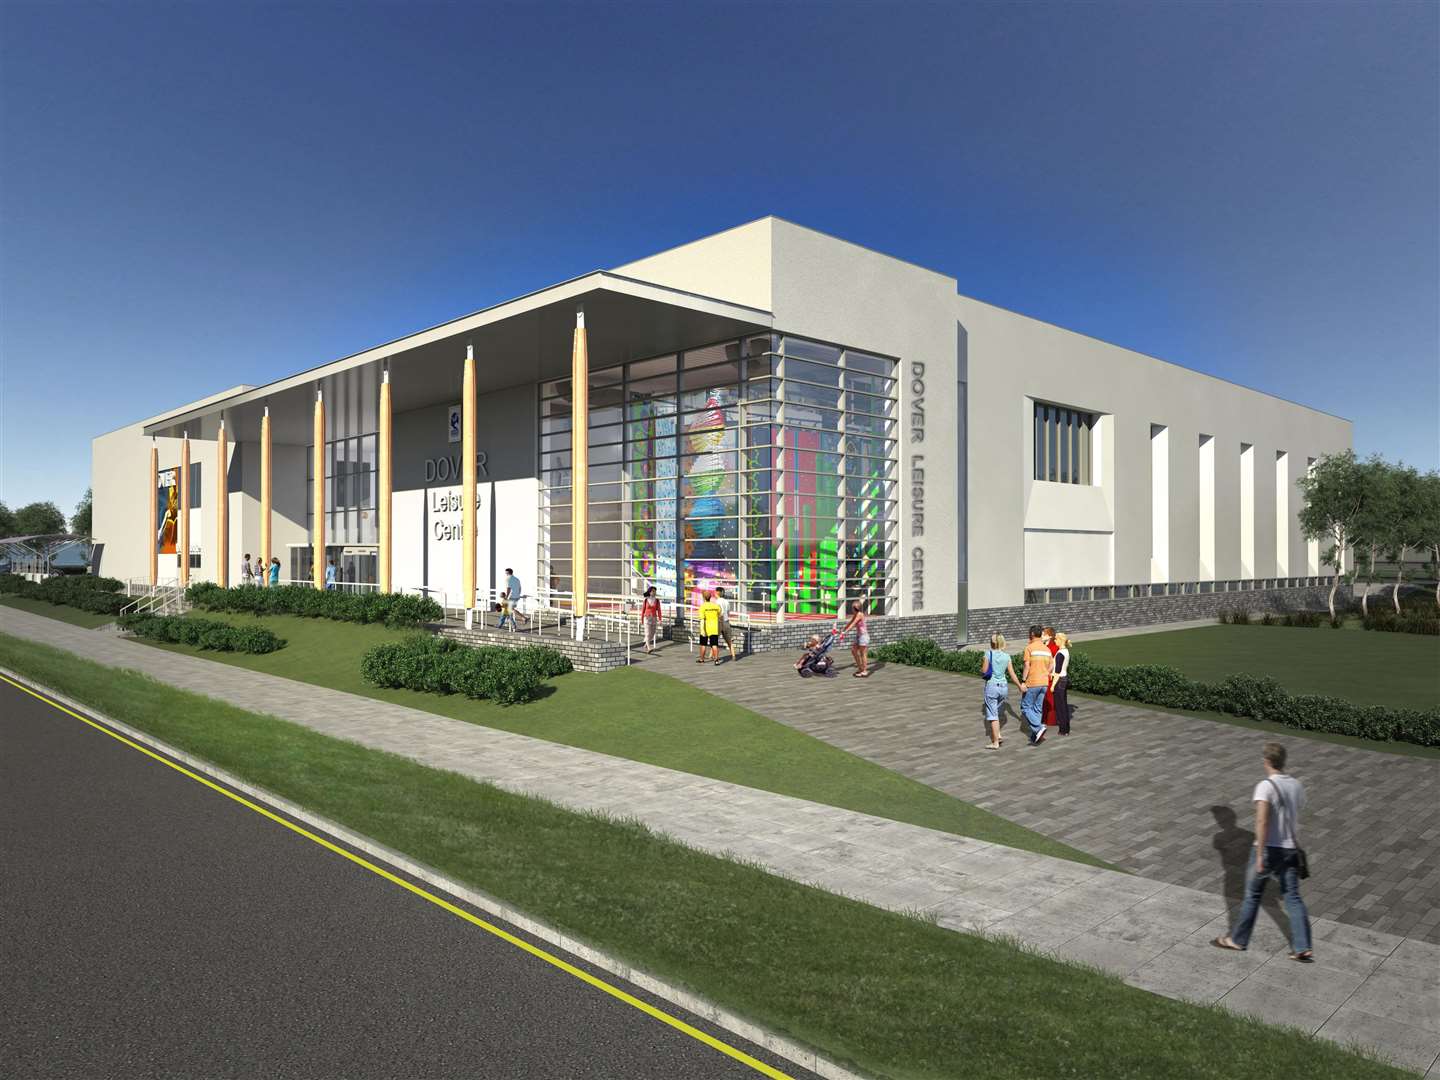 How the exterior of Dover Leisure Centre will look